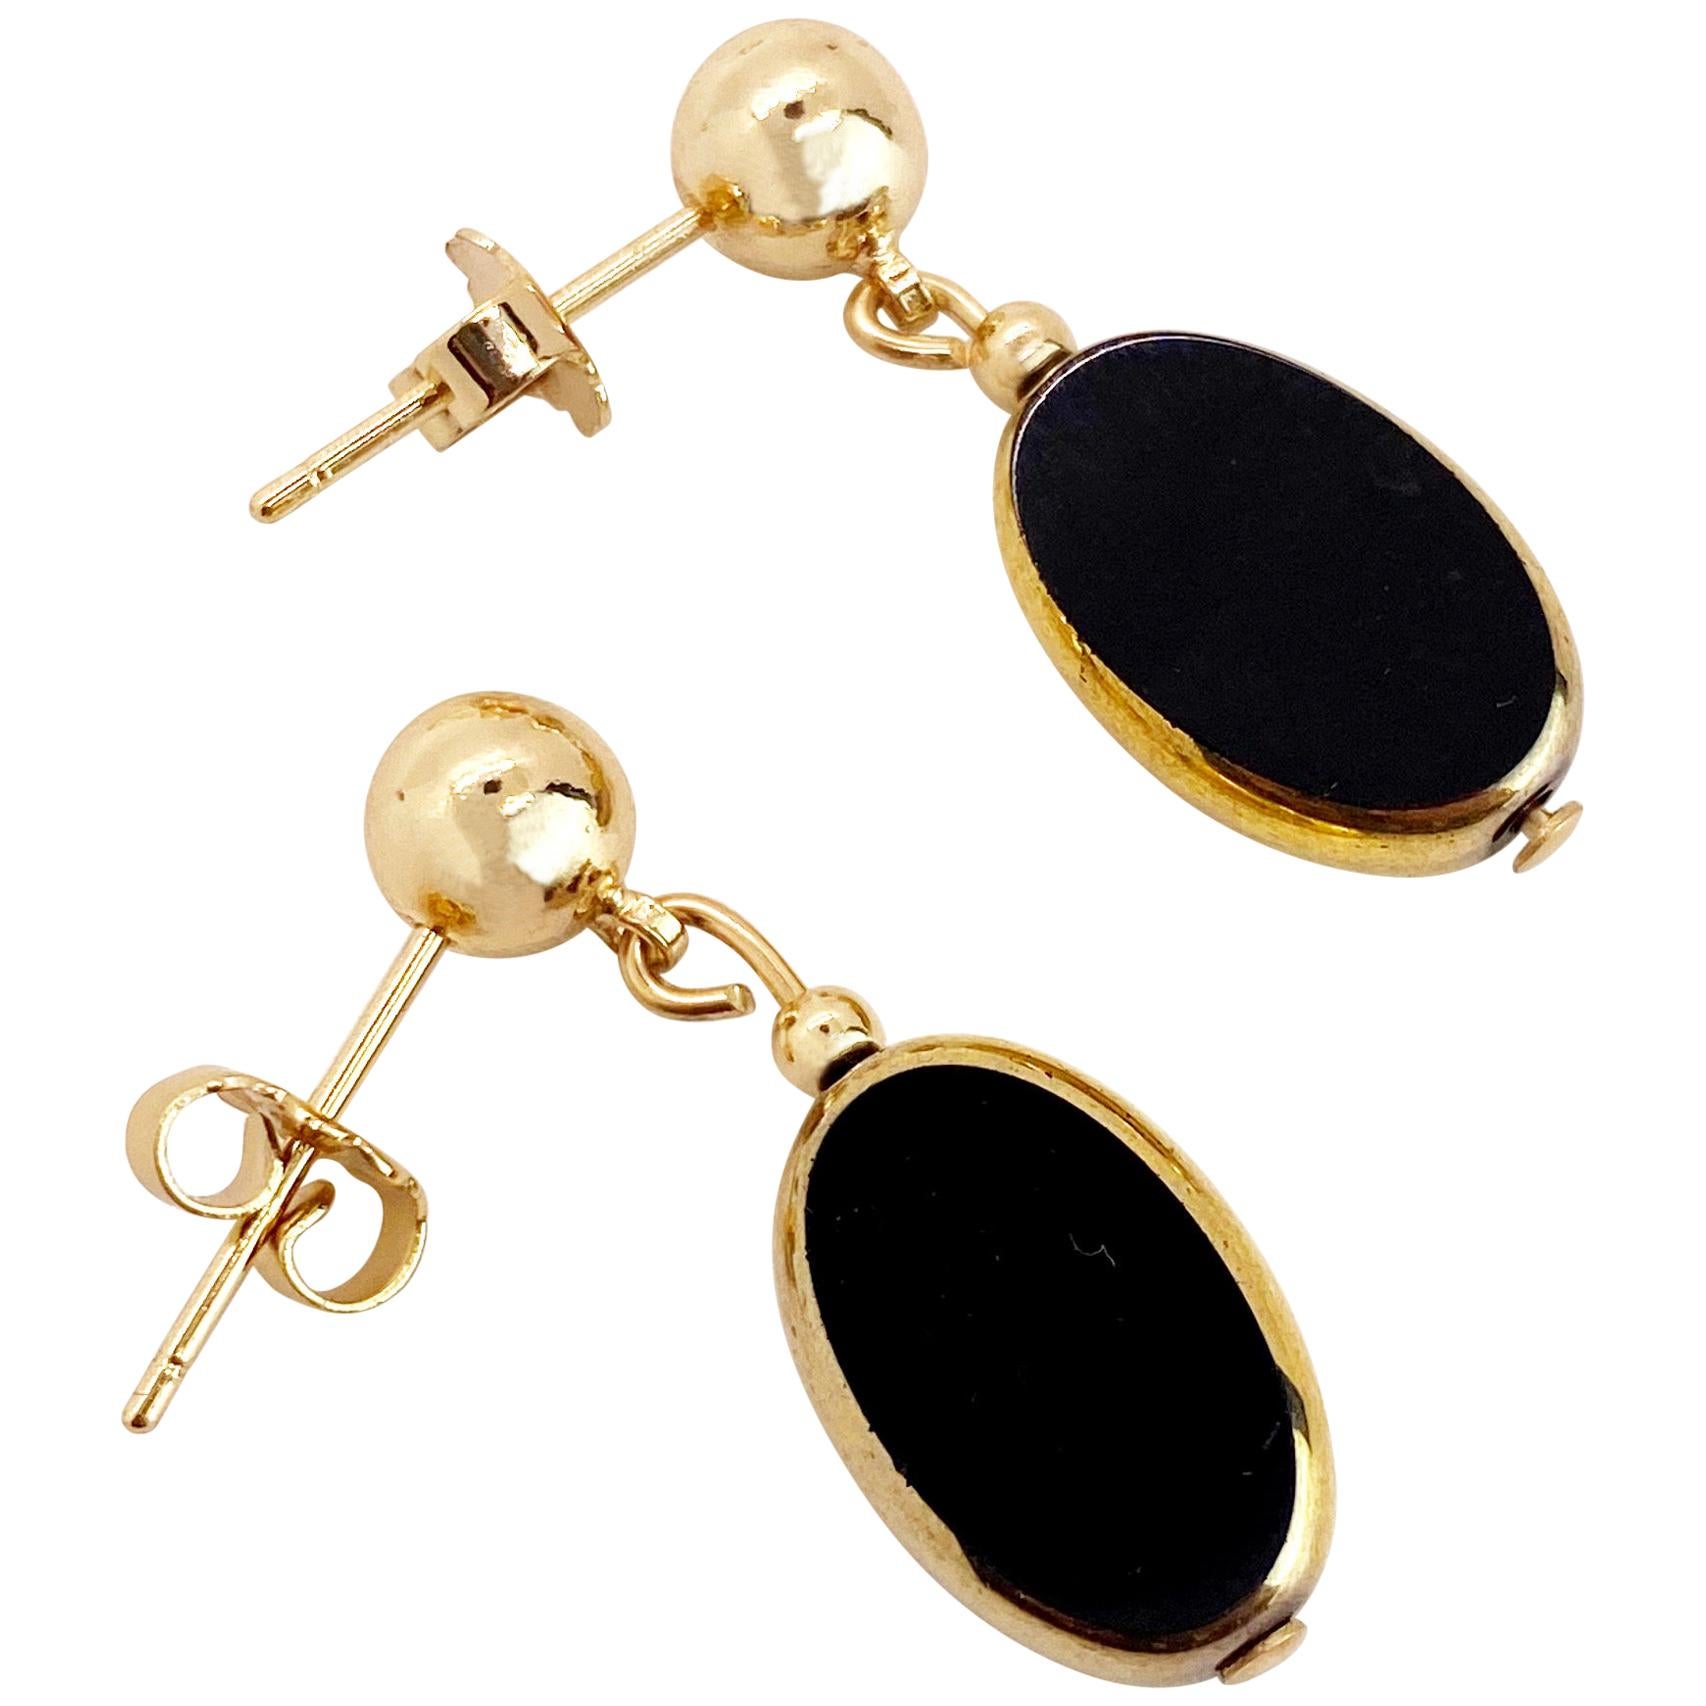 Black Oval Vintage German Glass Beads edged with 24K gold Earrings